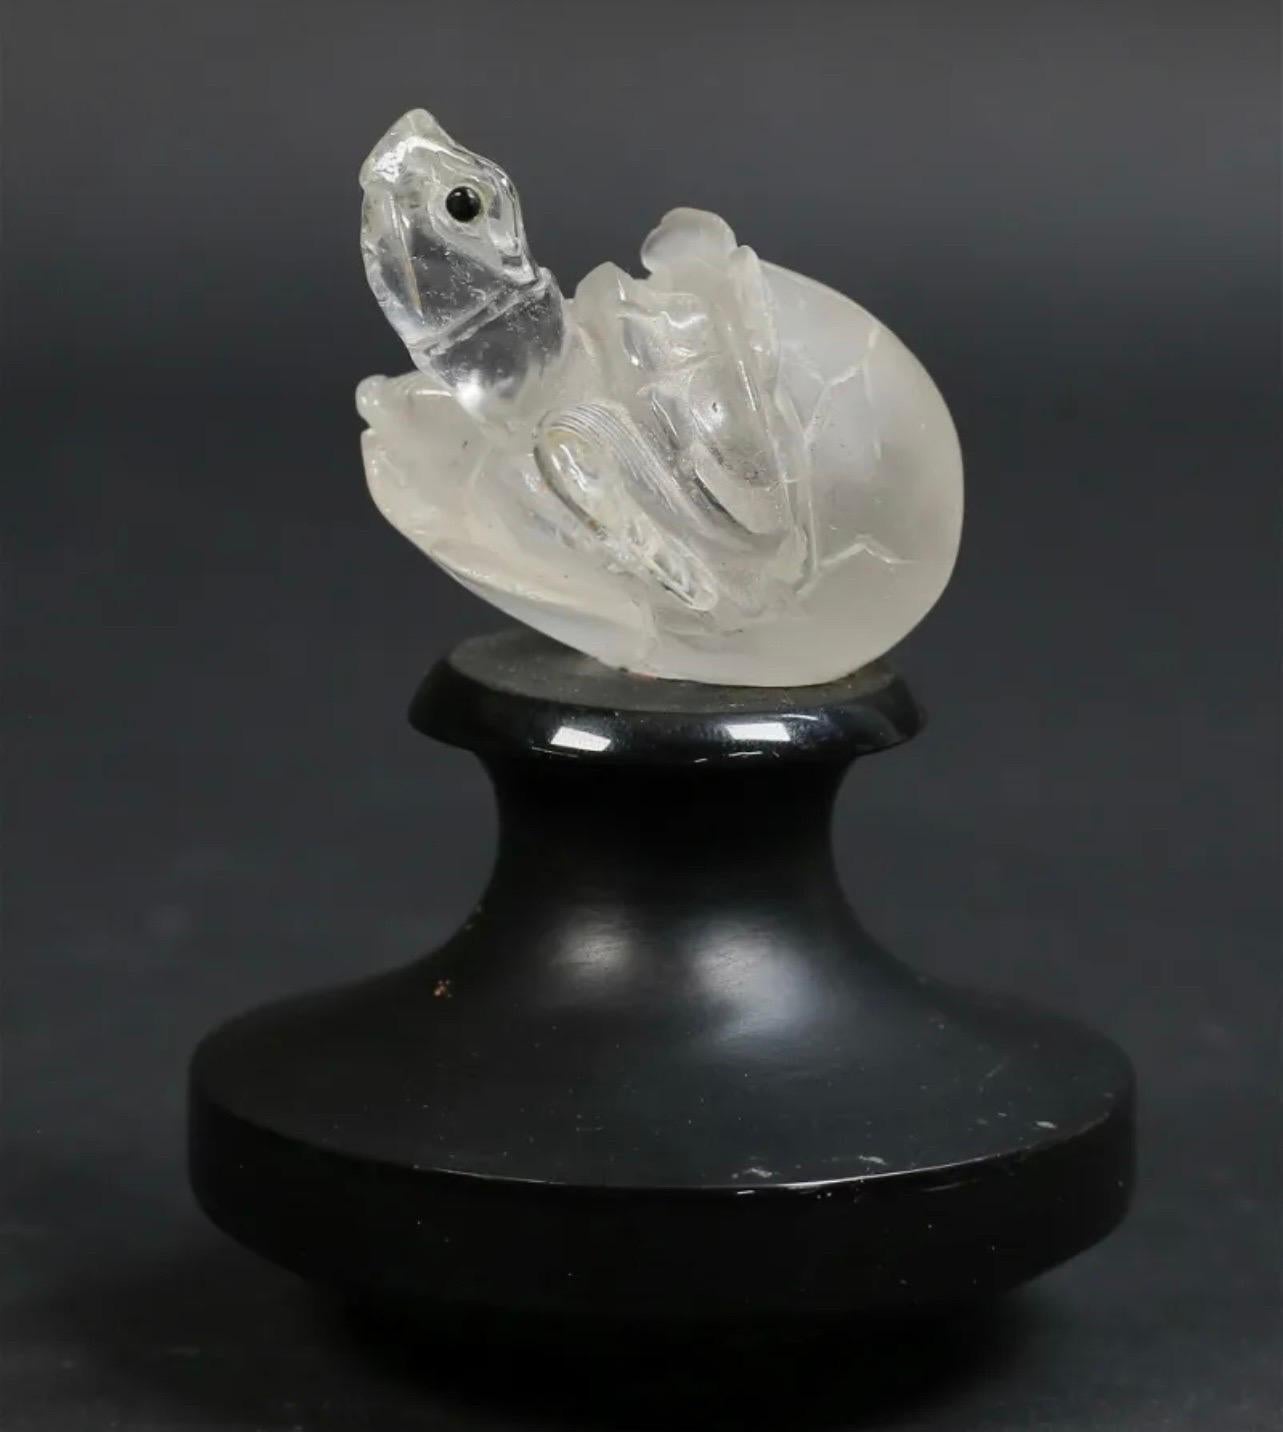 A Wonderful Carved Rock Crystal Sculpture Of A Turtle Coming Out Of A Shell Paperweight Desk Accessory.